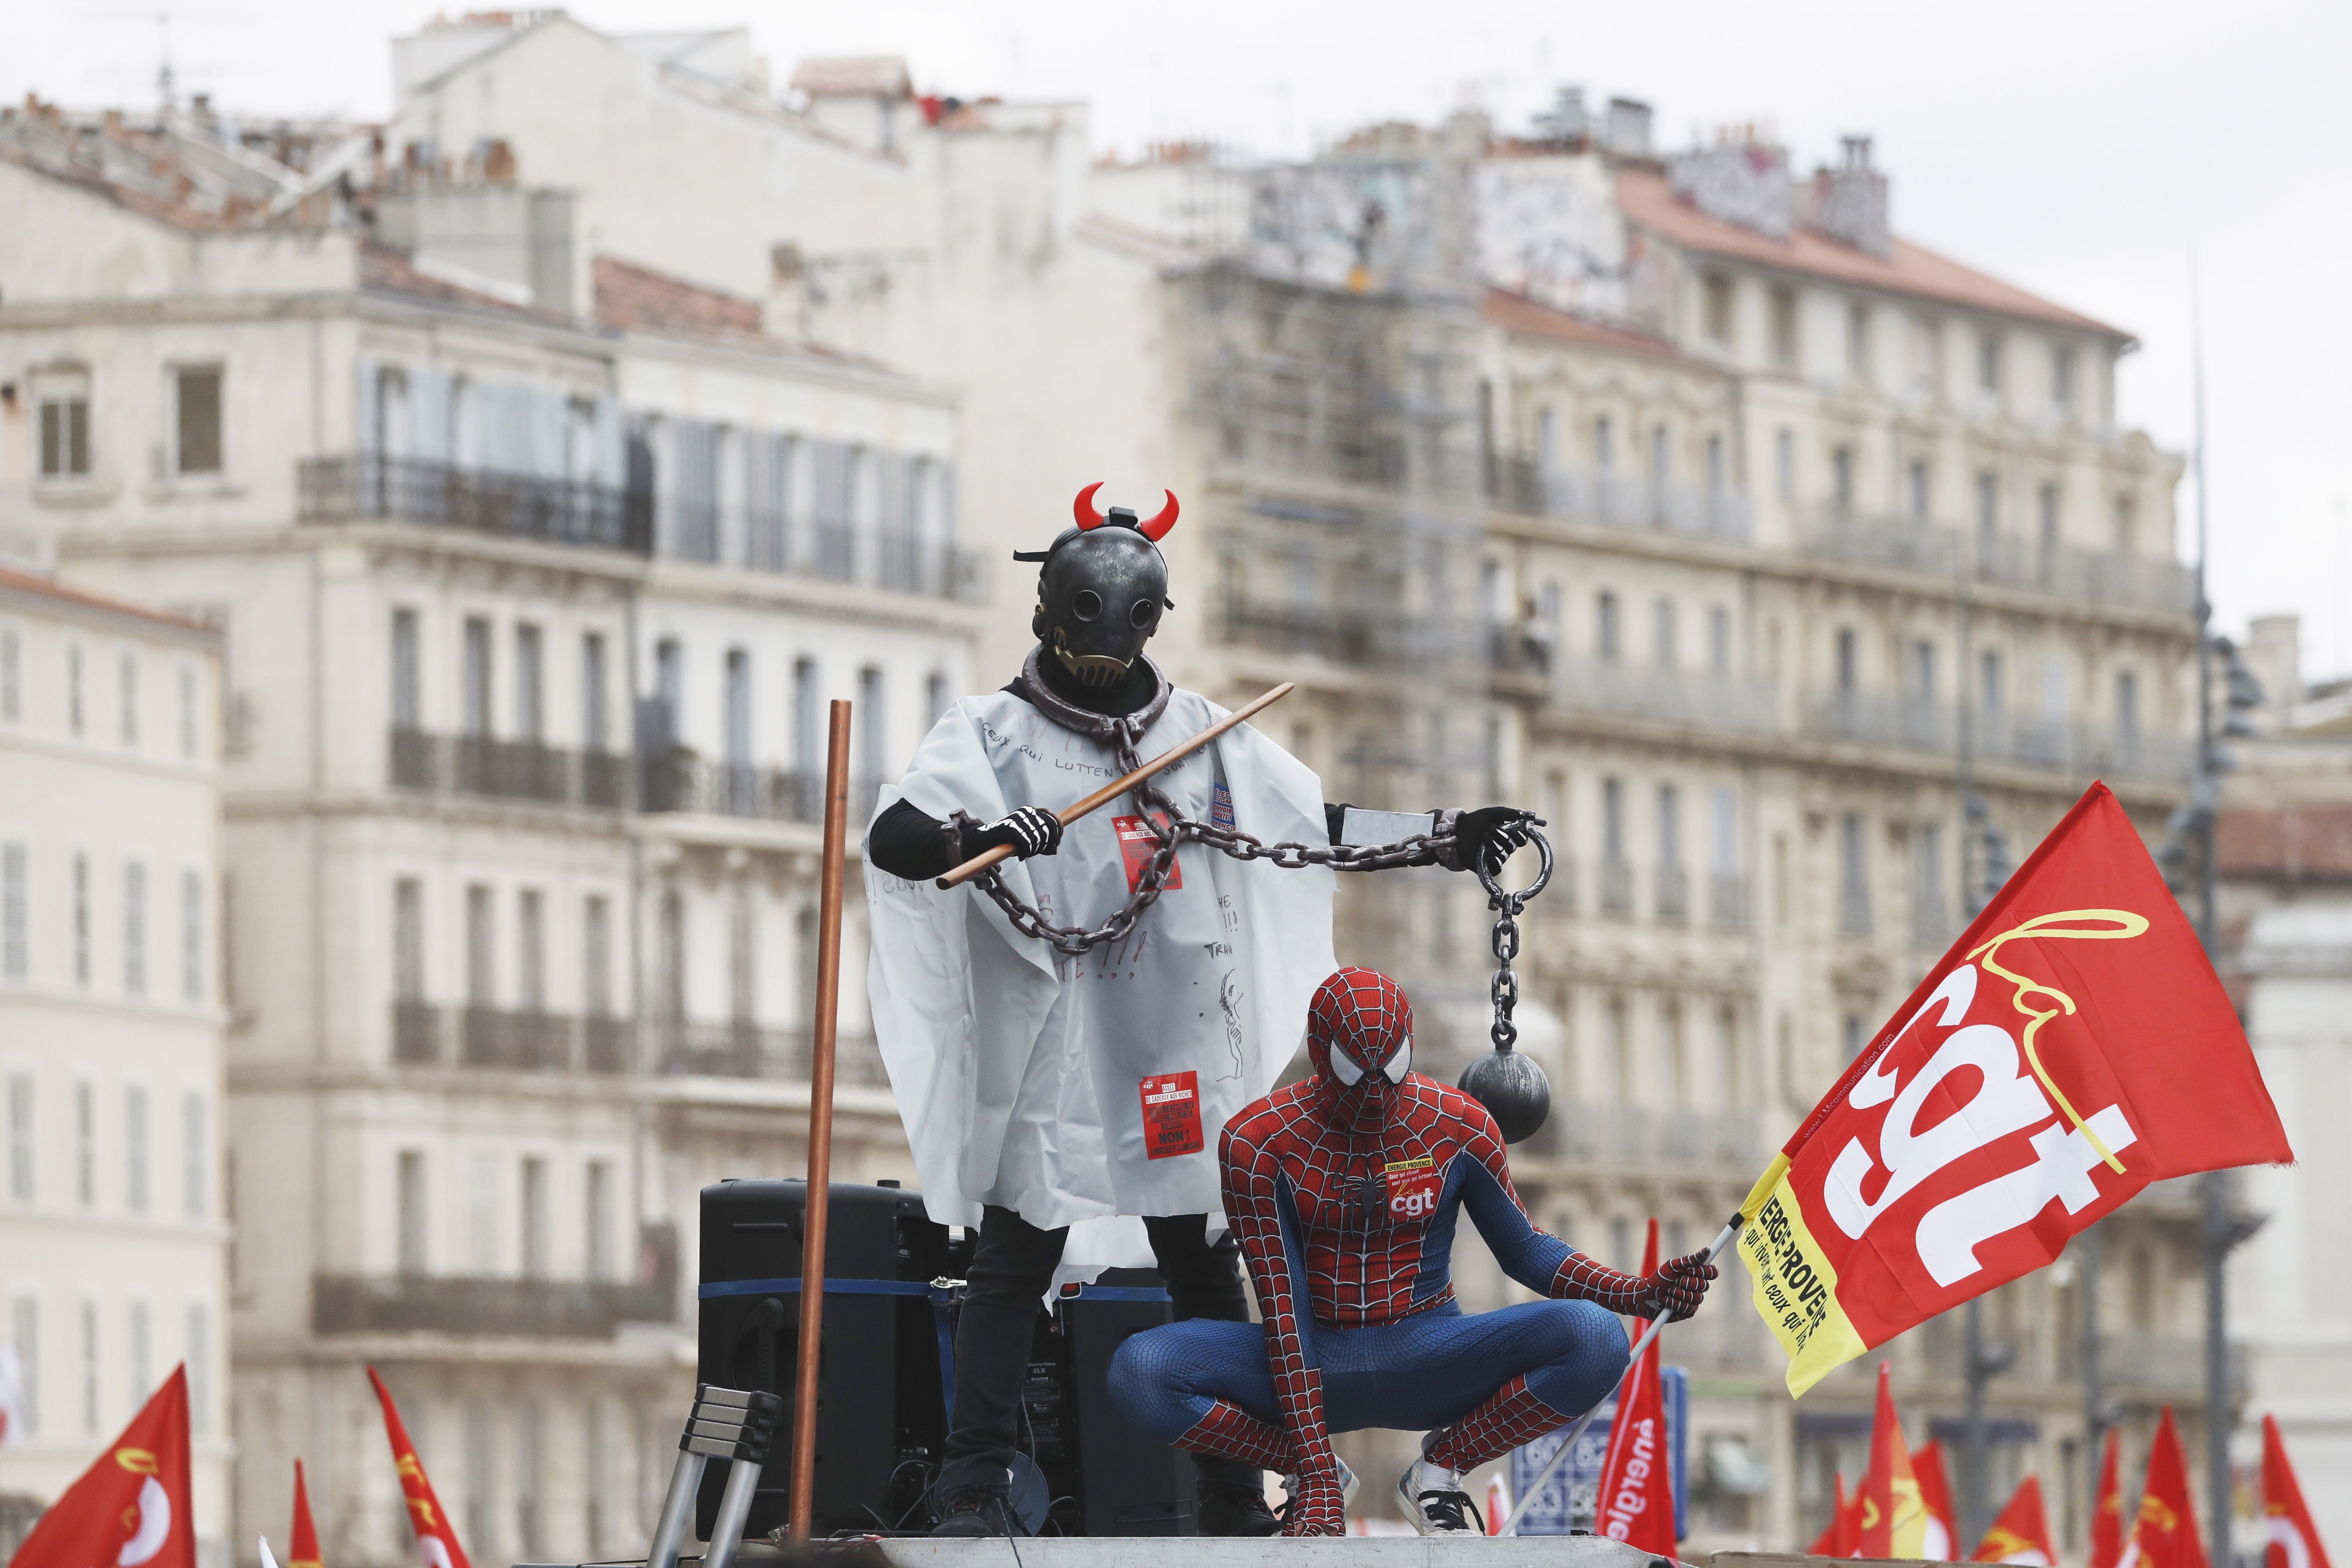 People wear costumes as they ride on a CGT union truck during a rally against the government’s pension reform